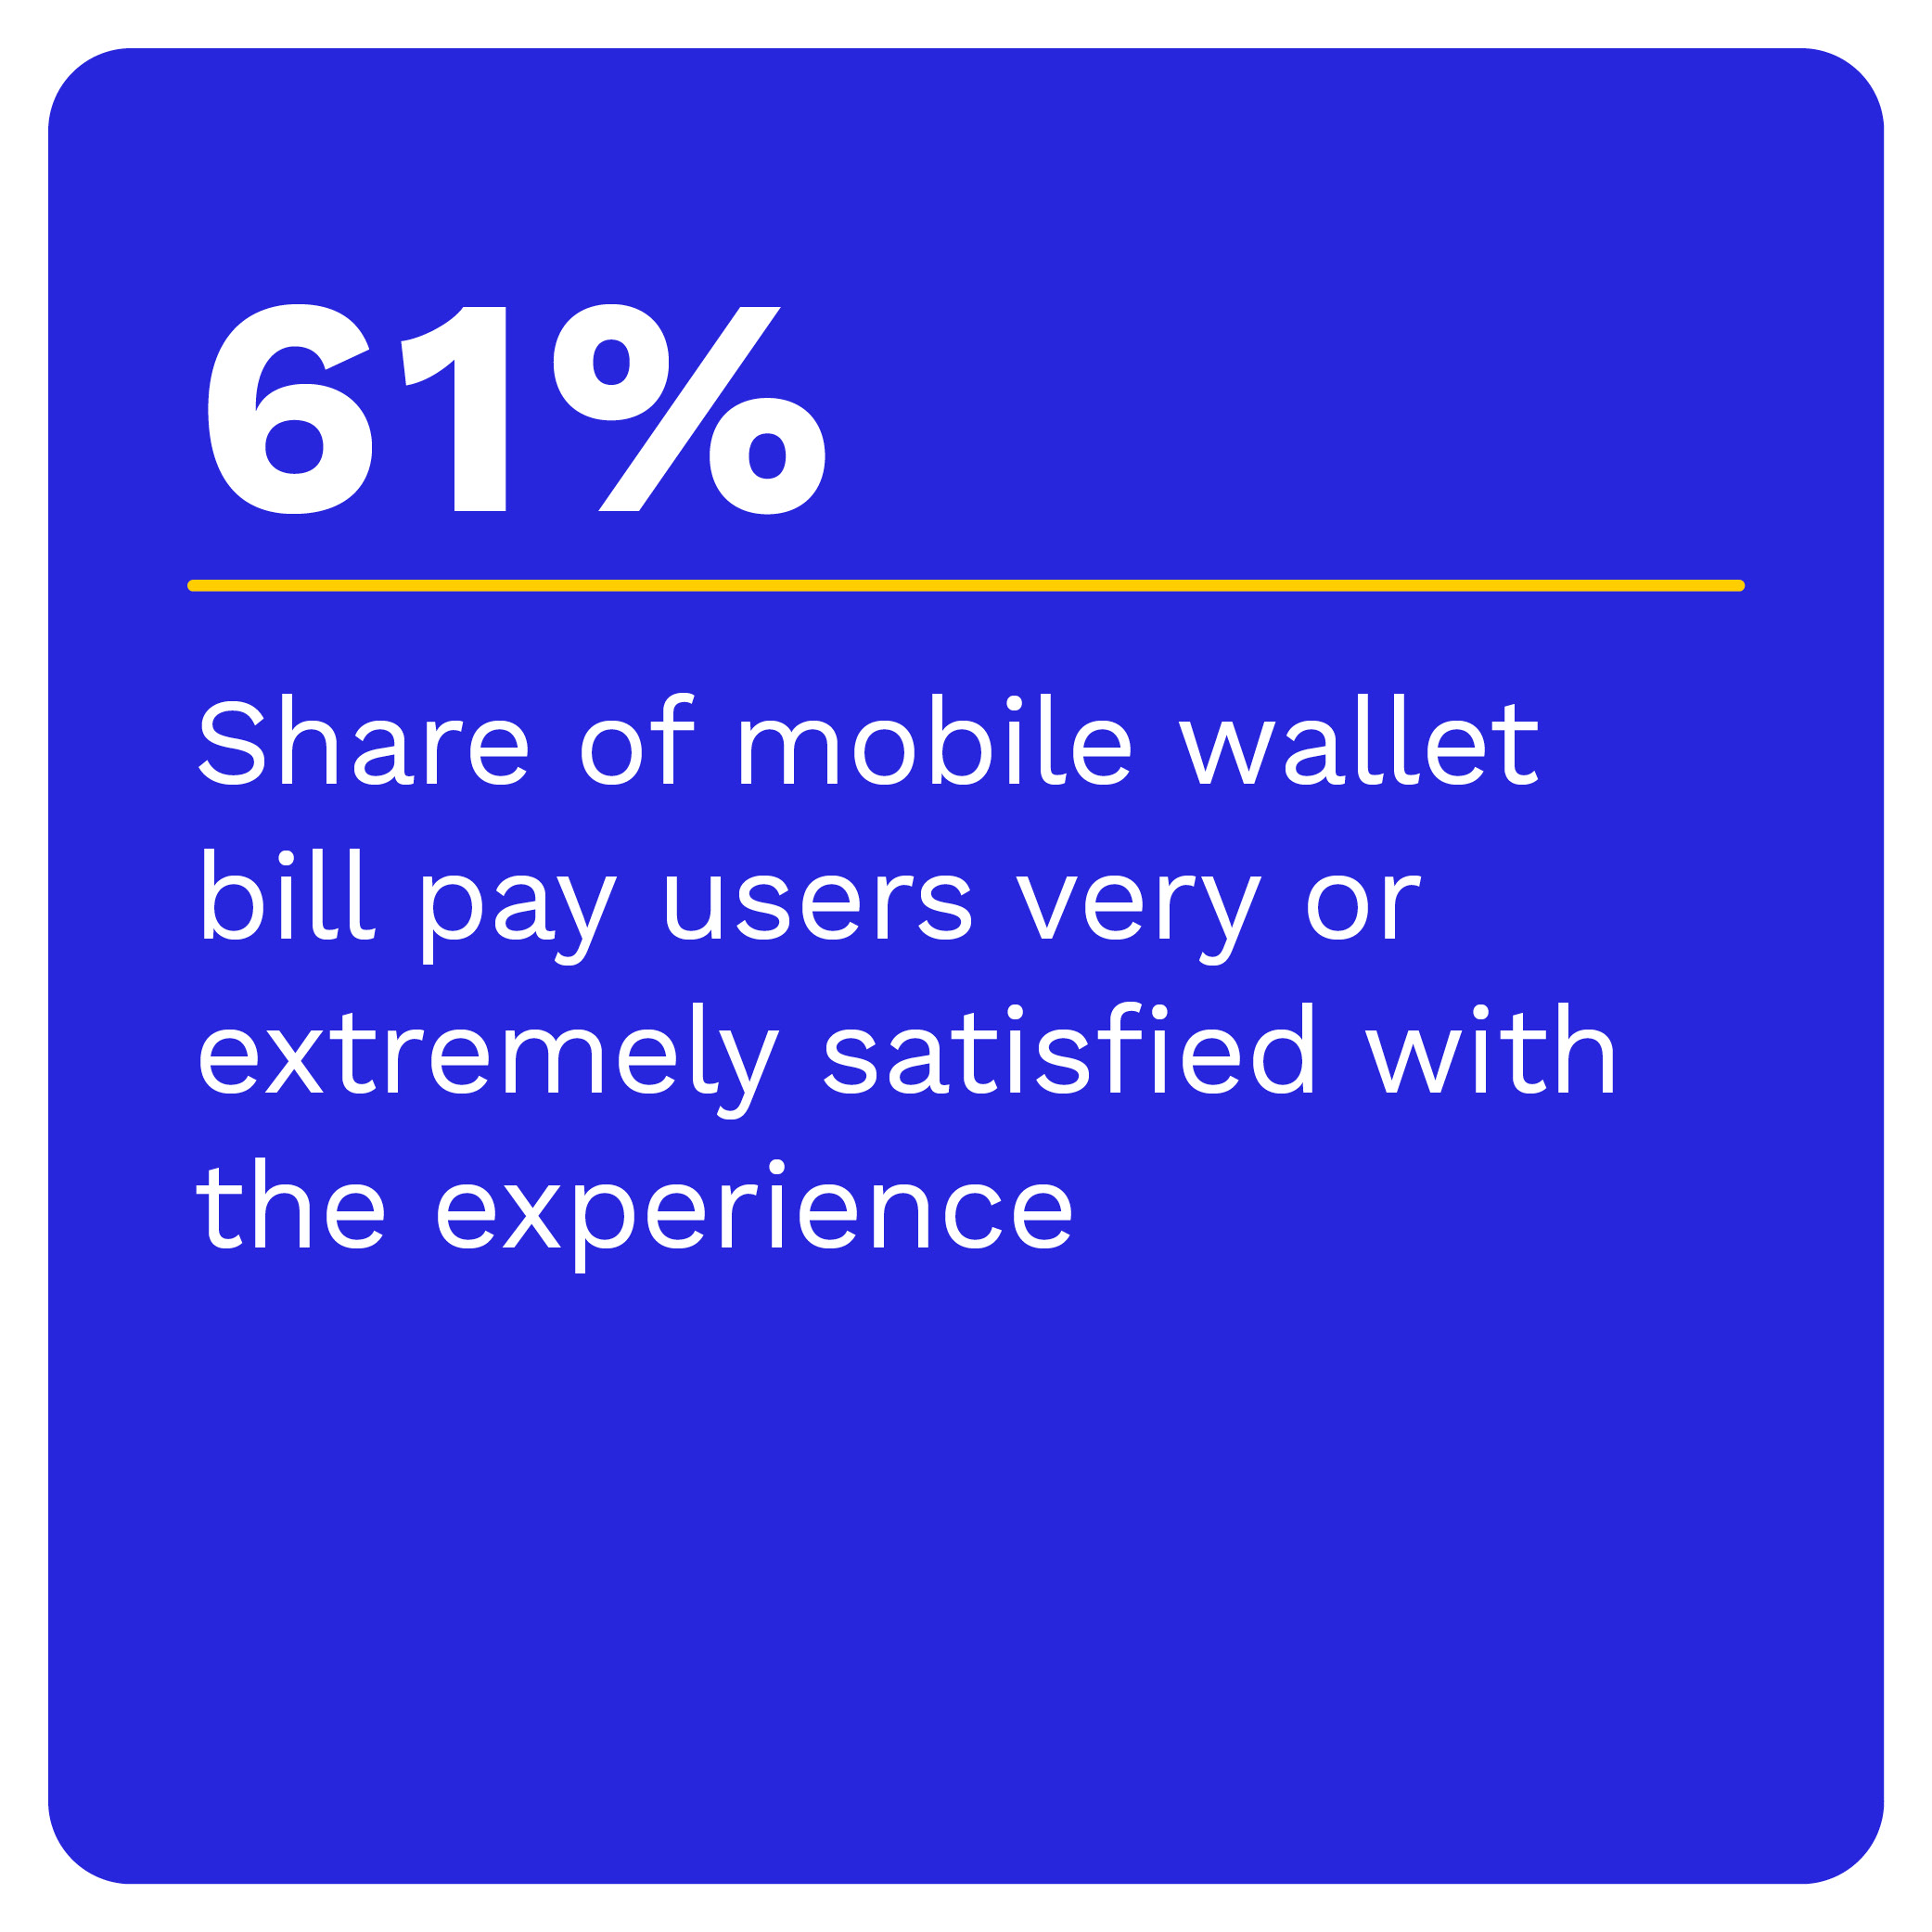 61%: Share of mobile wallet bill pay users very or extremely satisfied with the experience